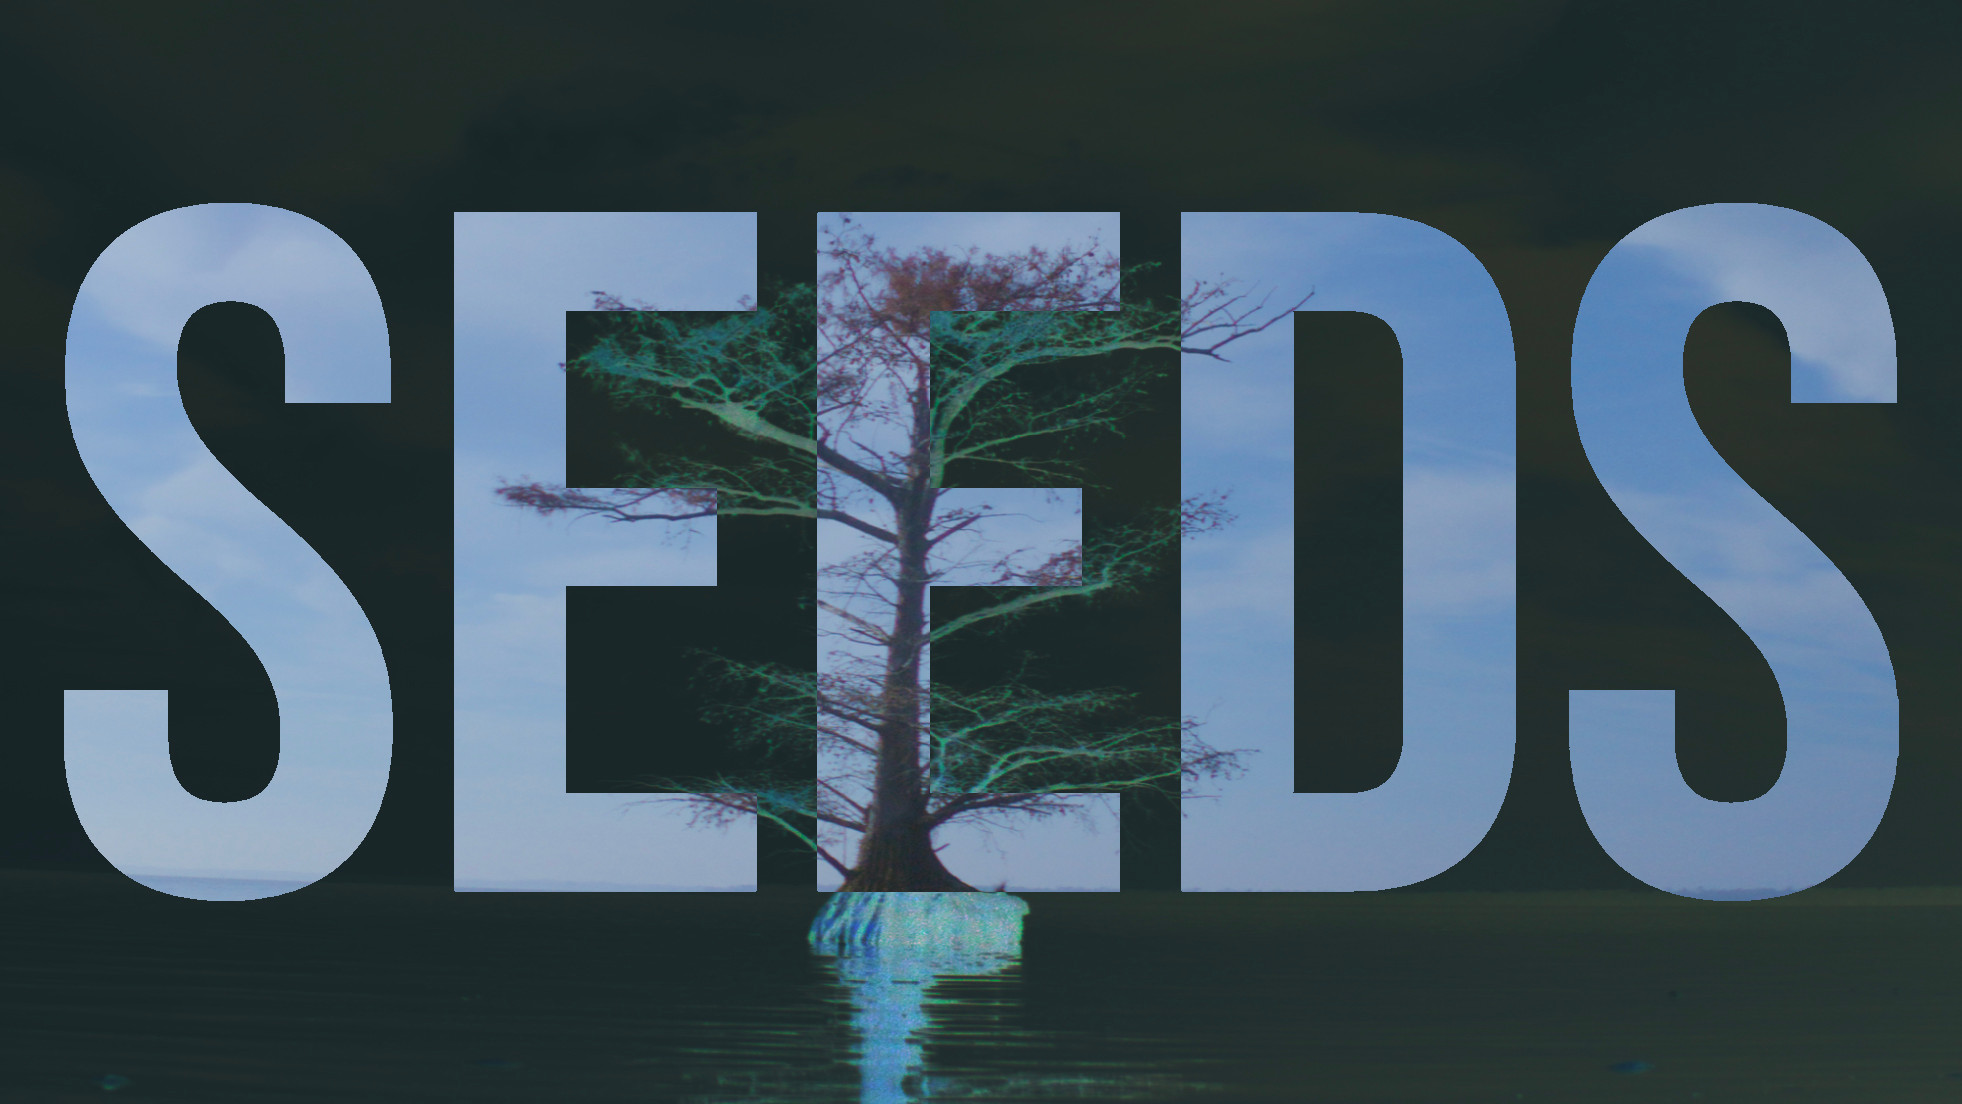 A single tree is surrounded by water with large text in the background reading ‘Seeds.’